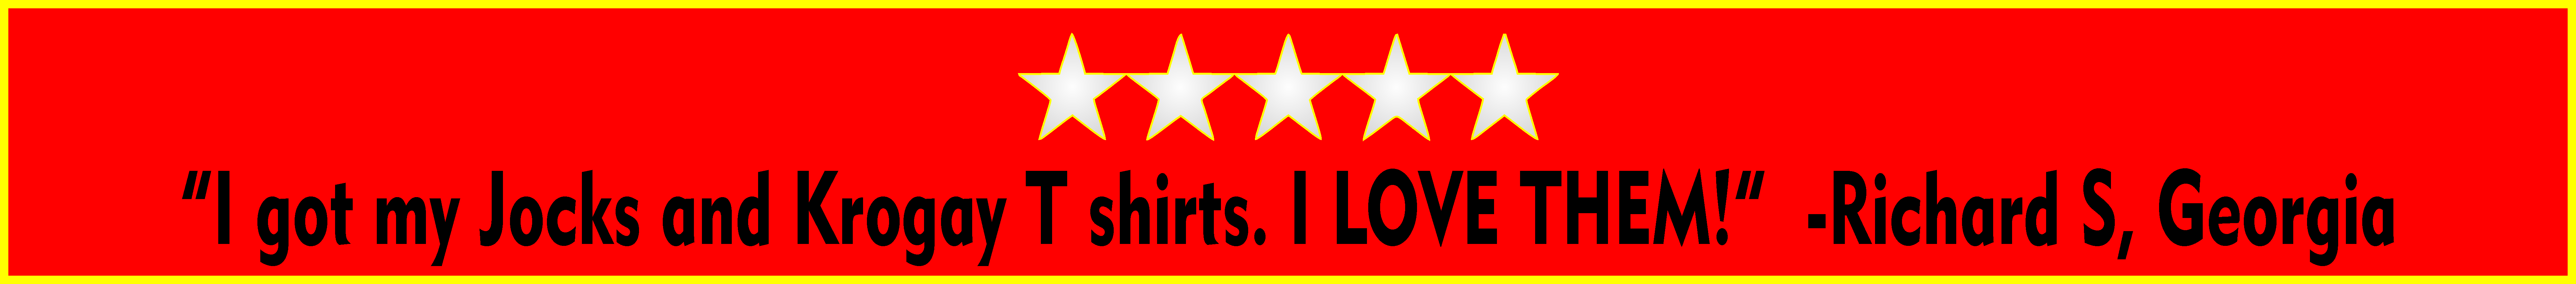 Review from Richard S in Atlanta Georgia. Our customers LOVE to talk about their #TBTeez shirts. It's great to be a part of reviving those memories of gay bars from our past. The world's largest collection of throwback t shirt designs honoring the gay bars we knew and loved. Available at theWOWbiz.com